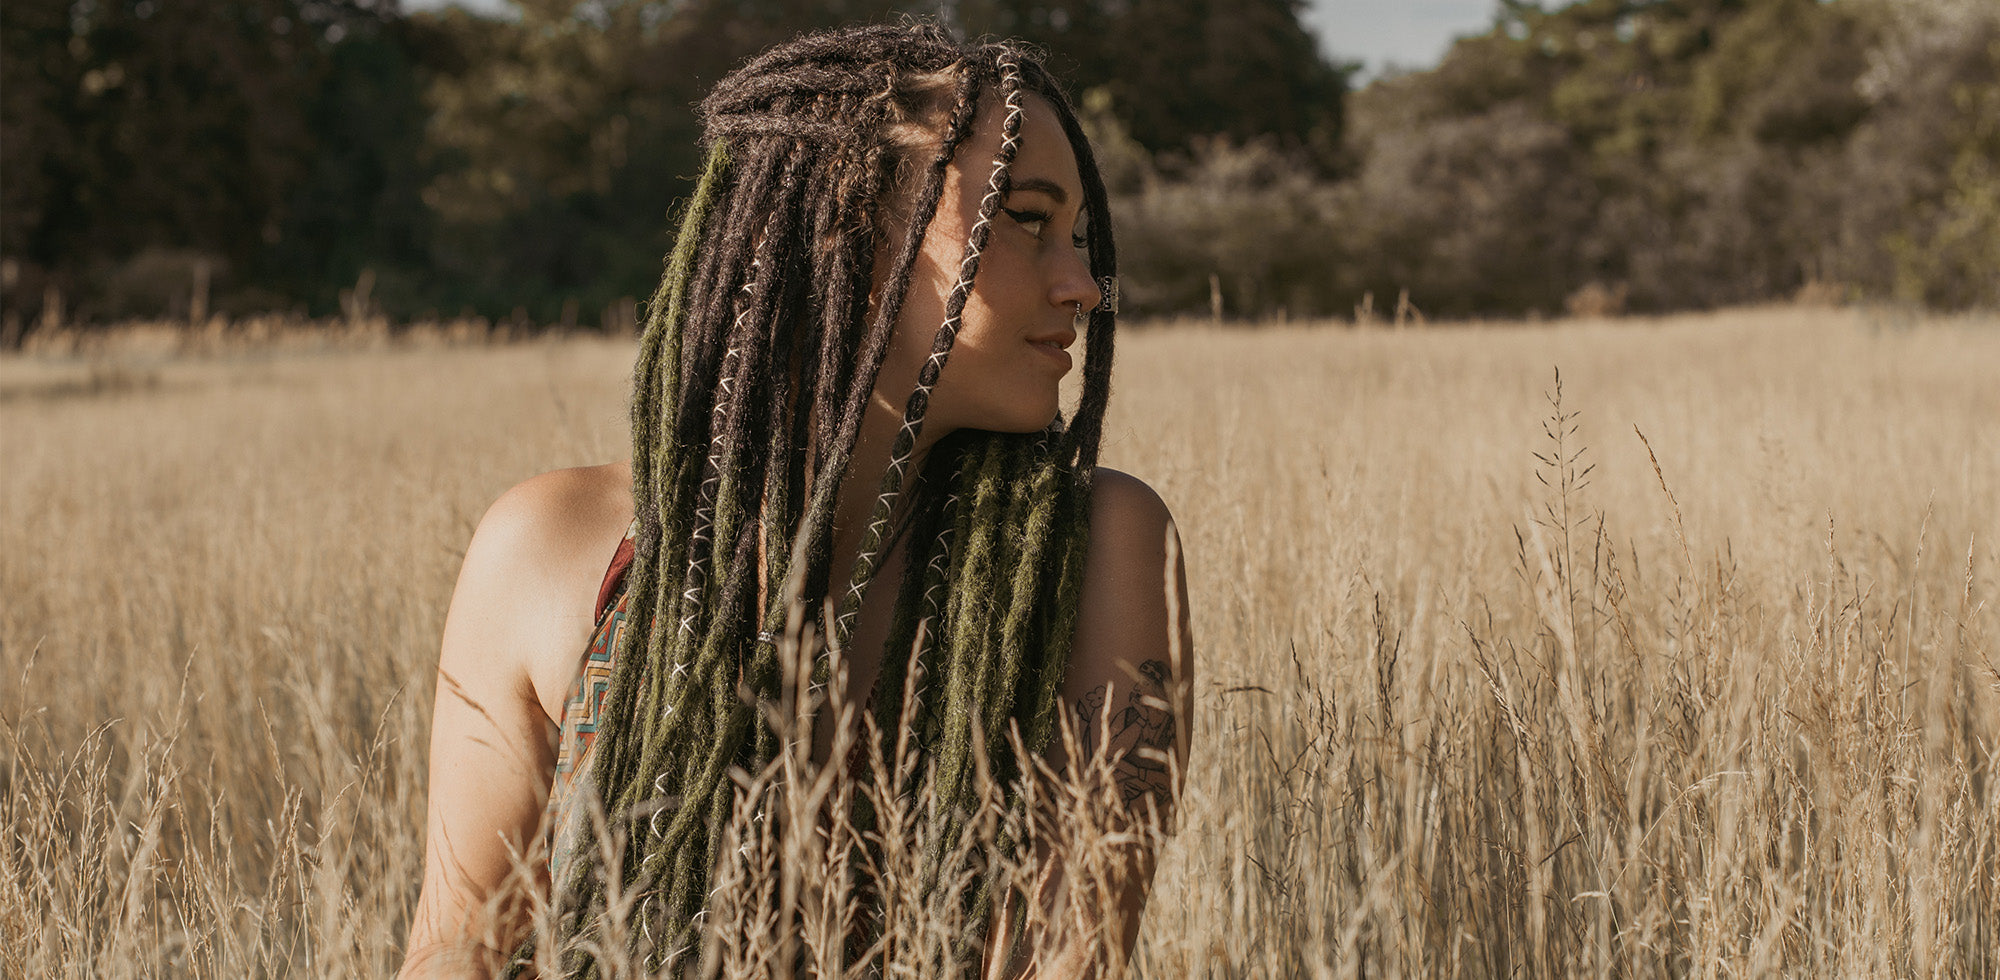 Romy wearing her Dark green dreads (mossy) sitting in a field and looking to the right